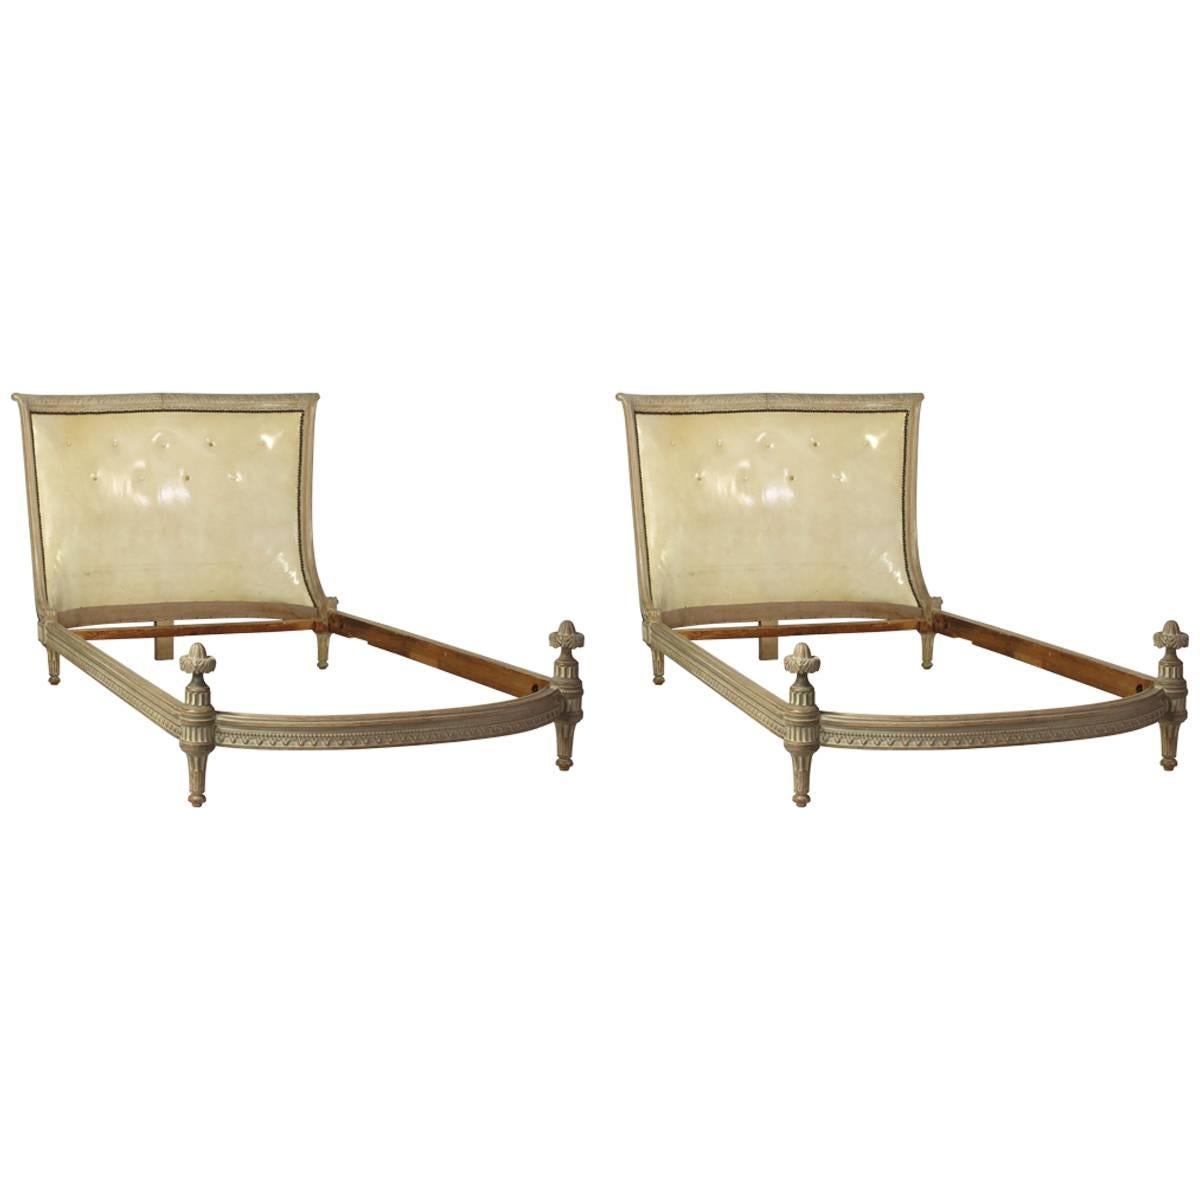 Pair of Neoclassical Style Twin Beds